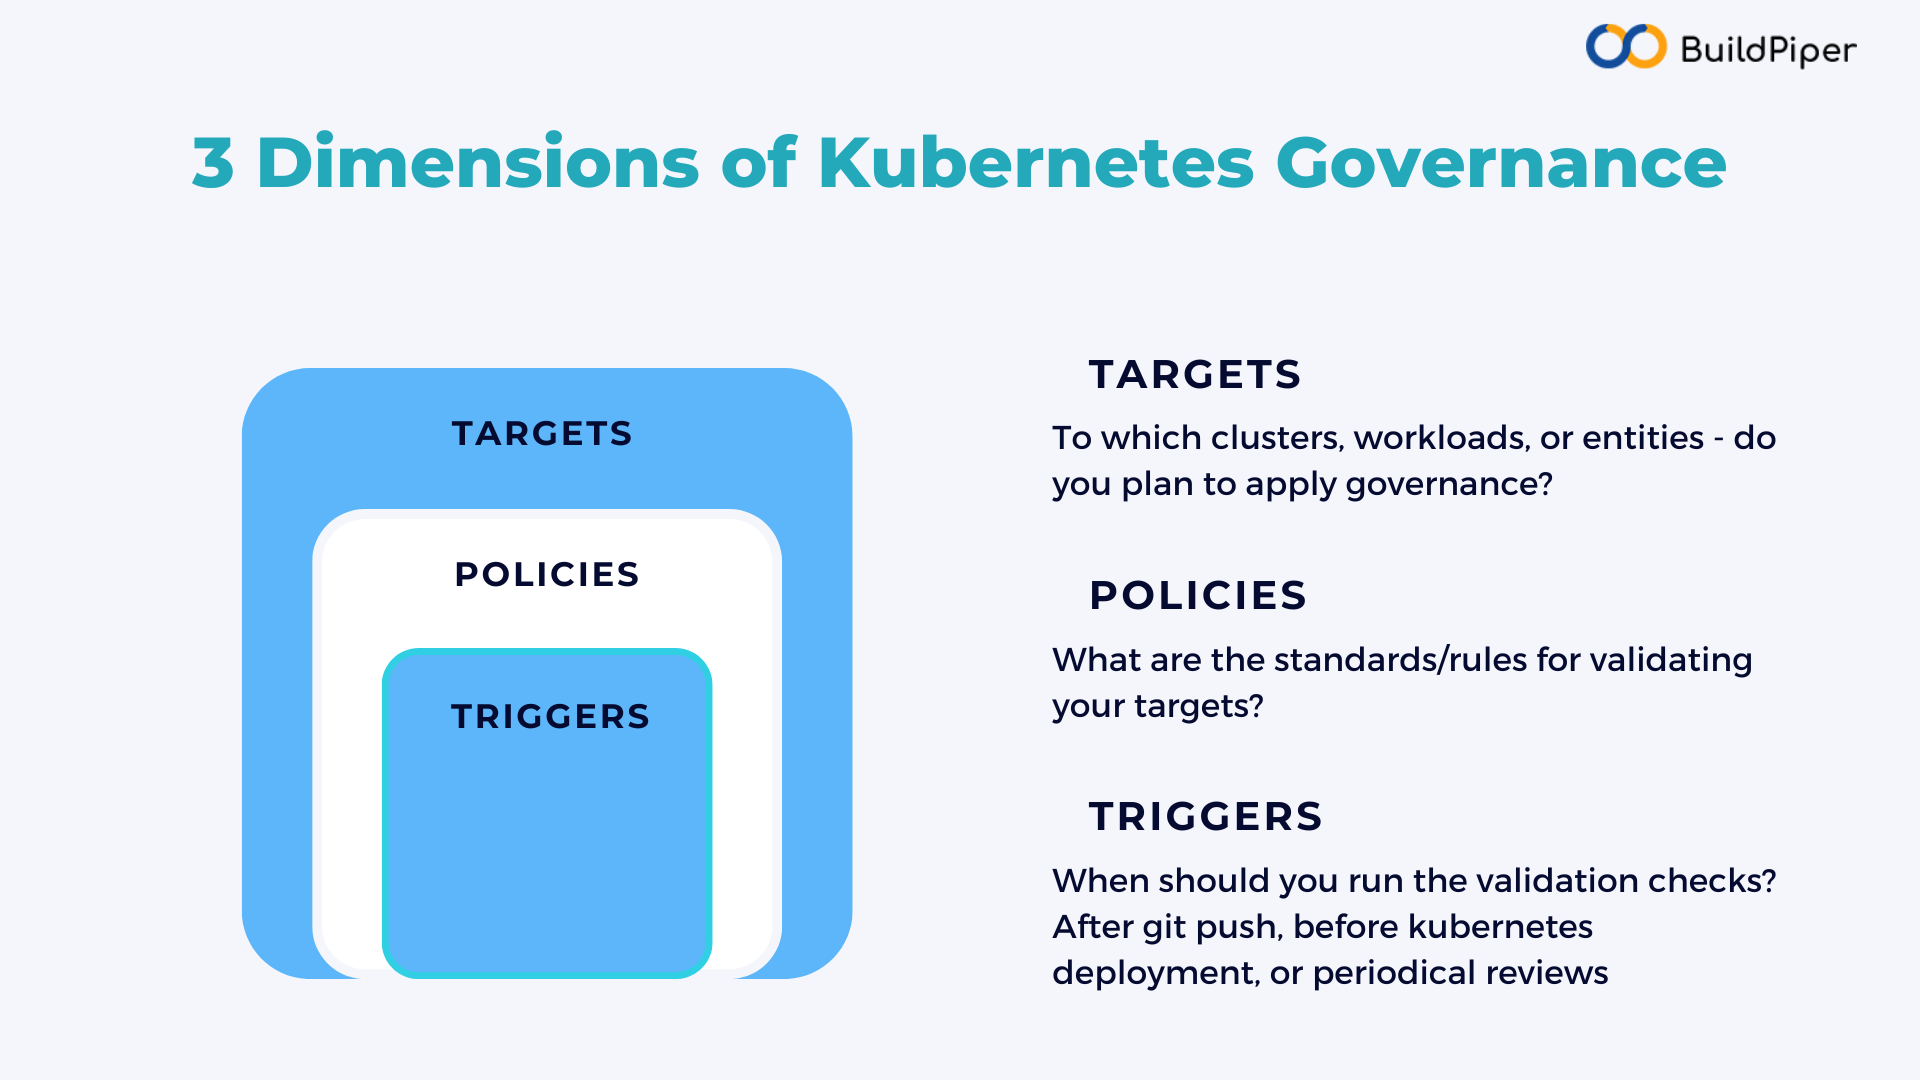 Dimensions of Kubernetes Governance